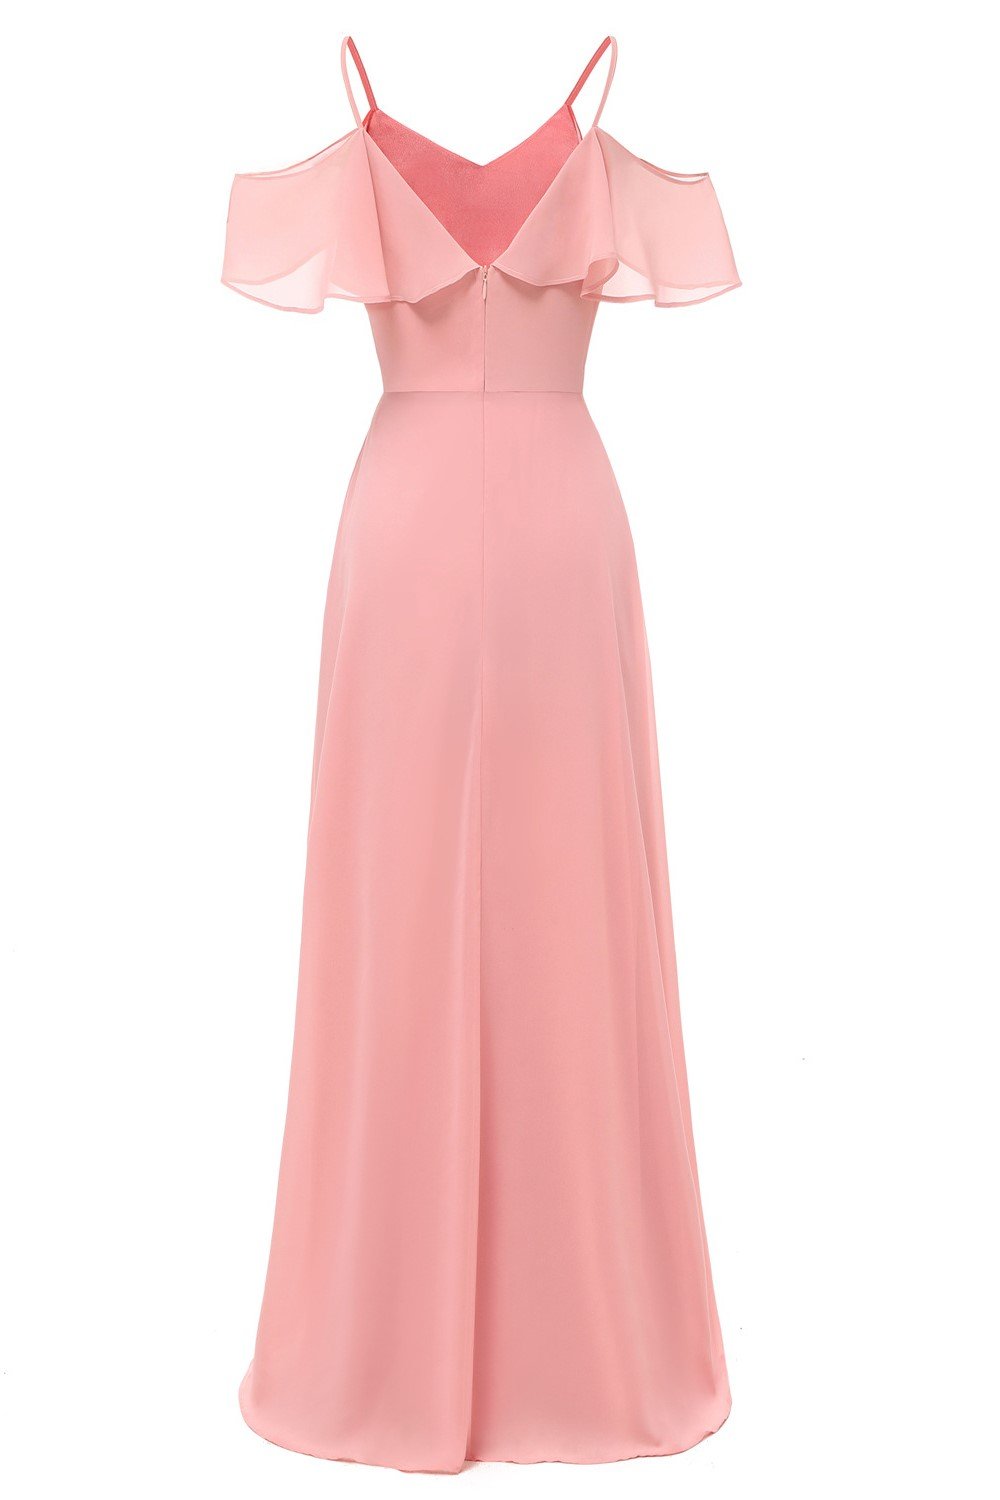 flounced-long-pink-bridesmaid-dresses-with-spaghetti-straps-1